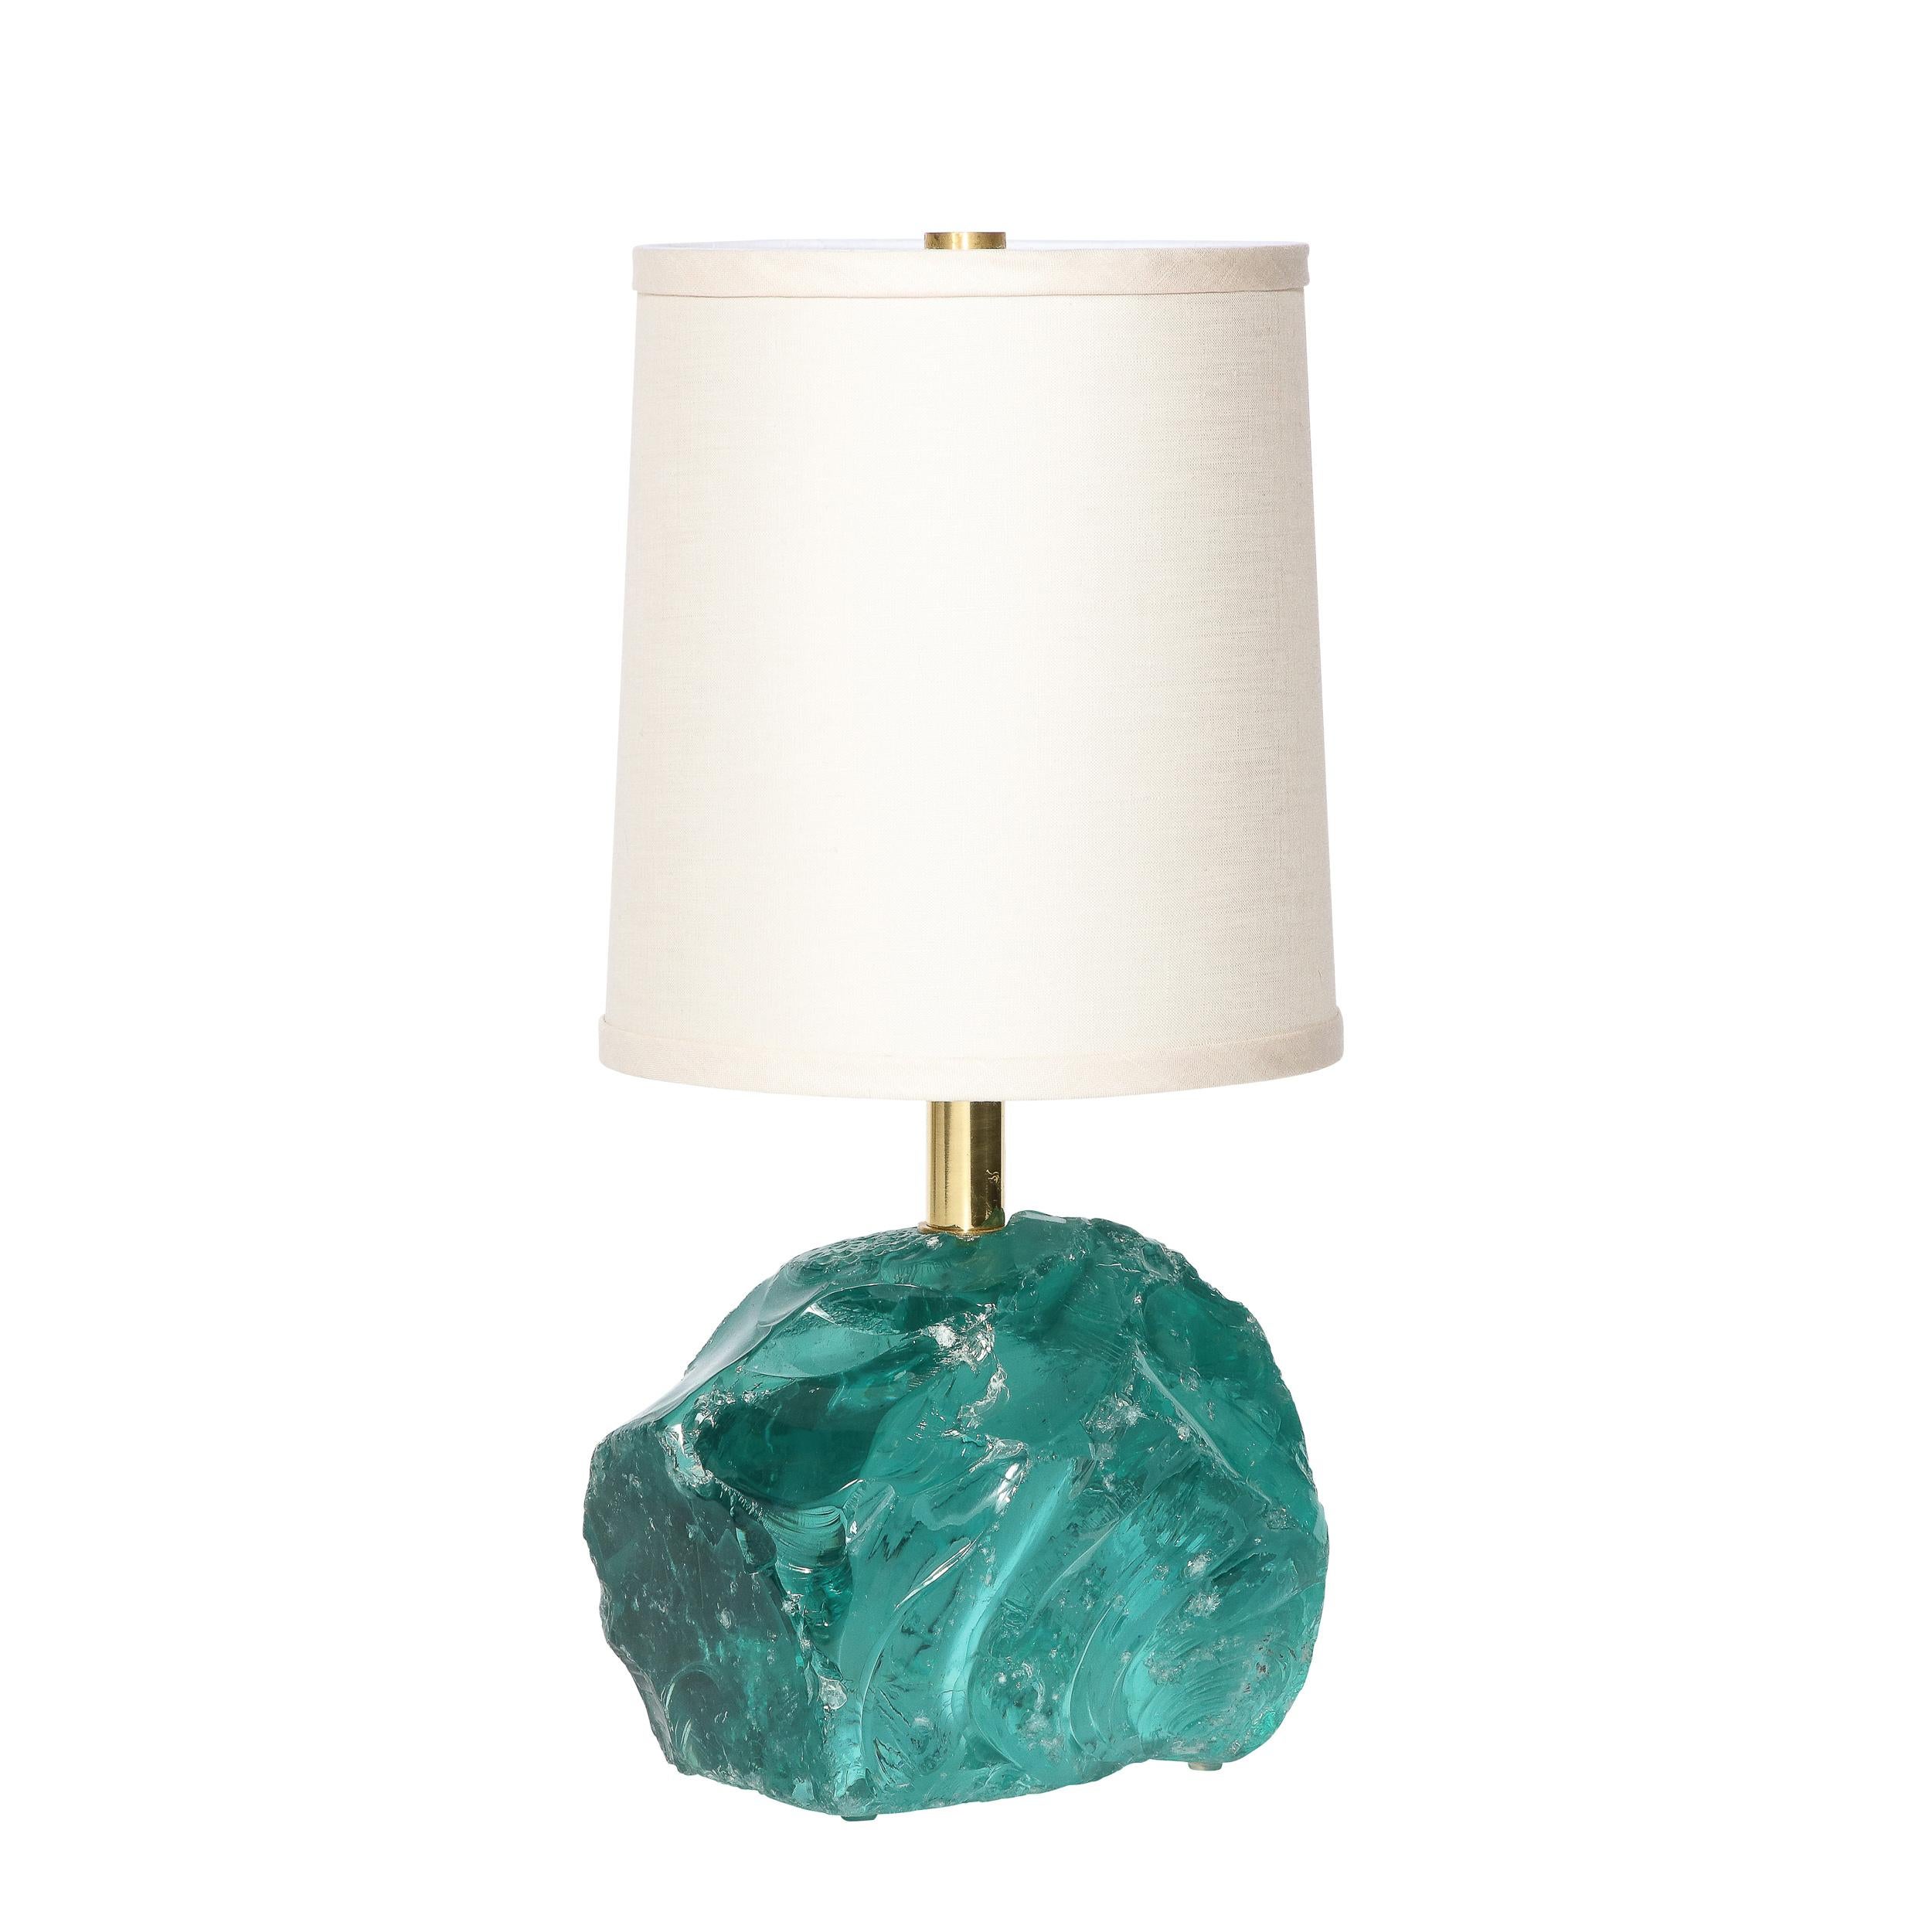 Italian Pair of Modernist Hand-Cut Aquamarine Murano Glass Table Lamps For Sale